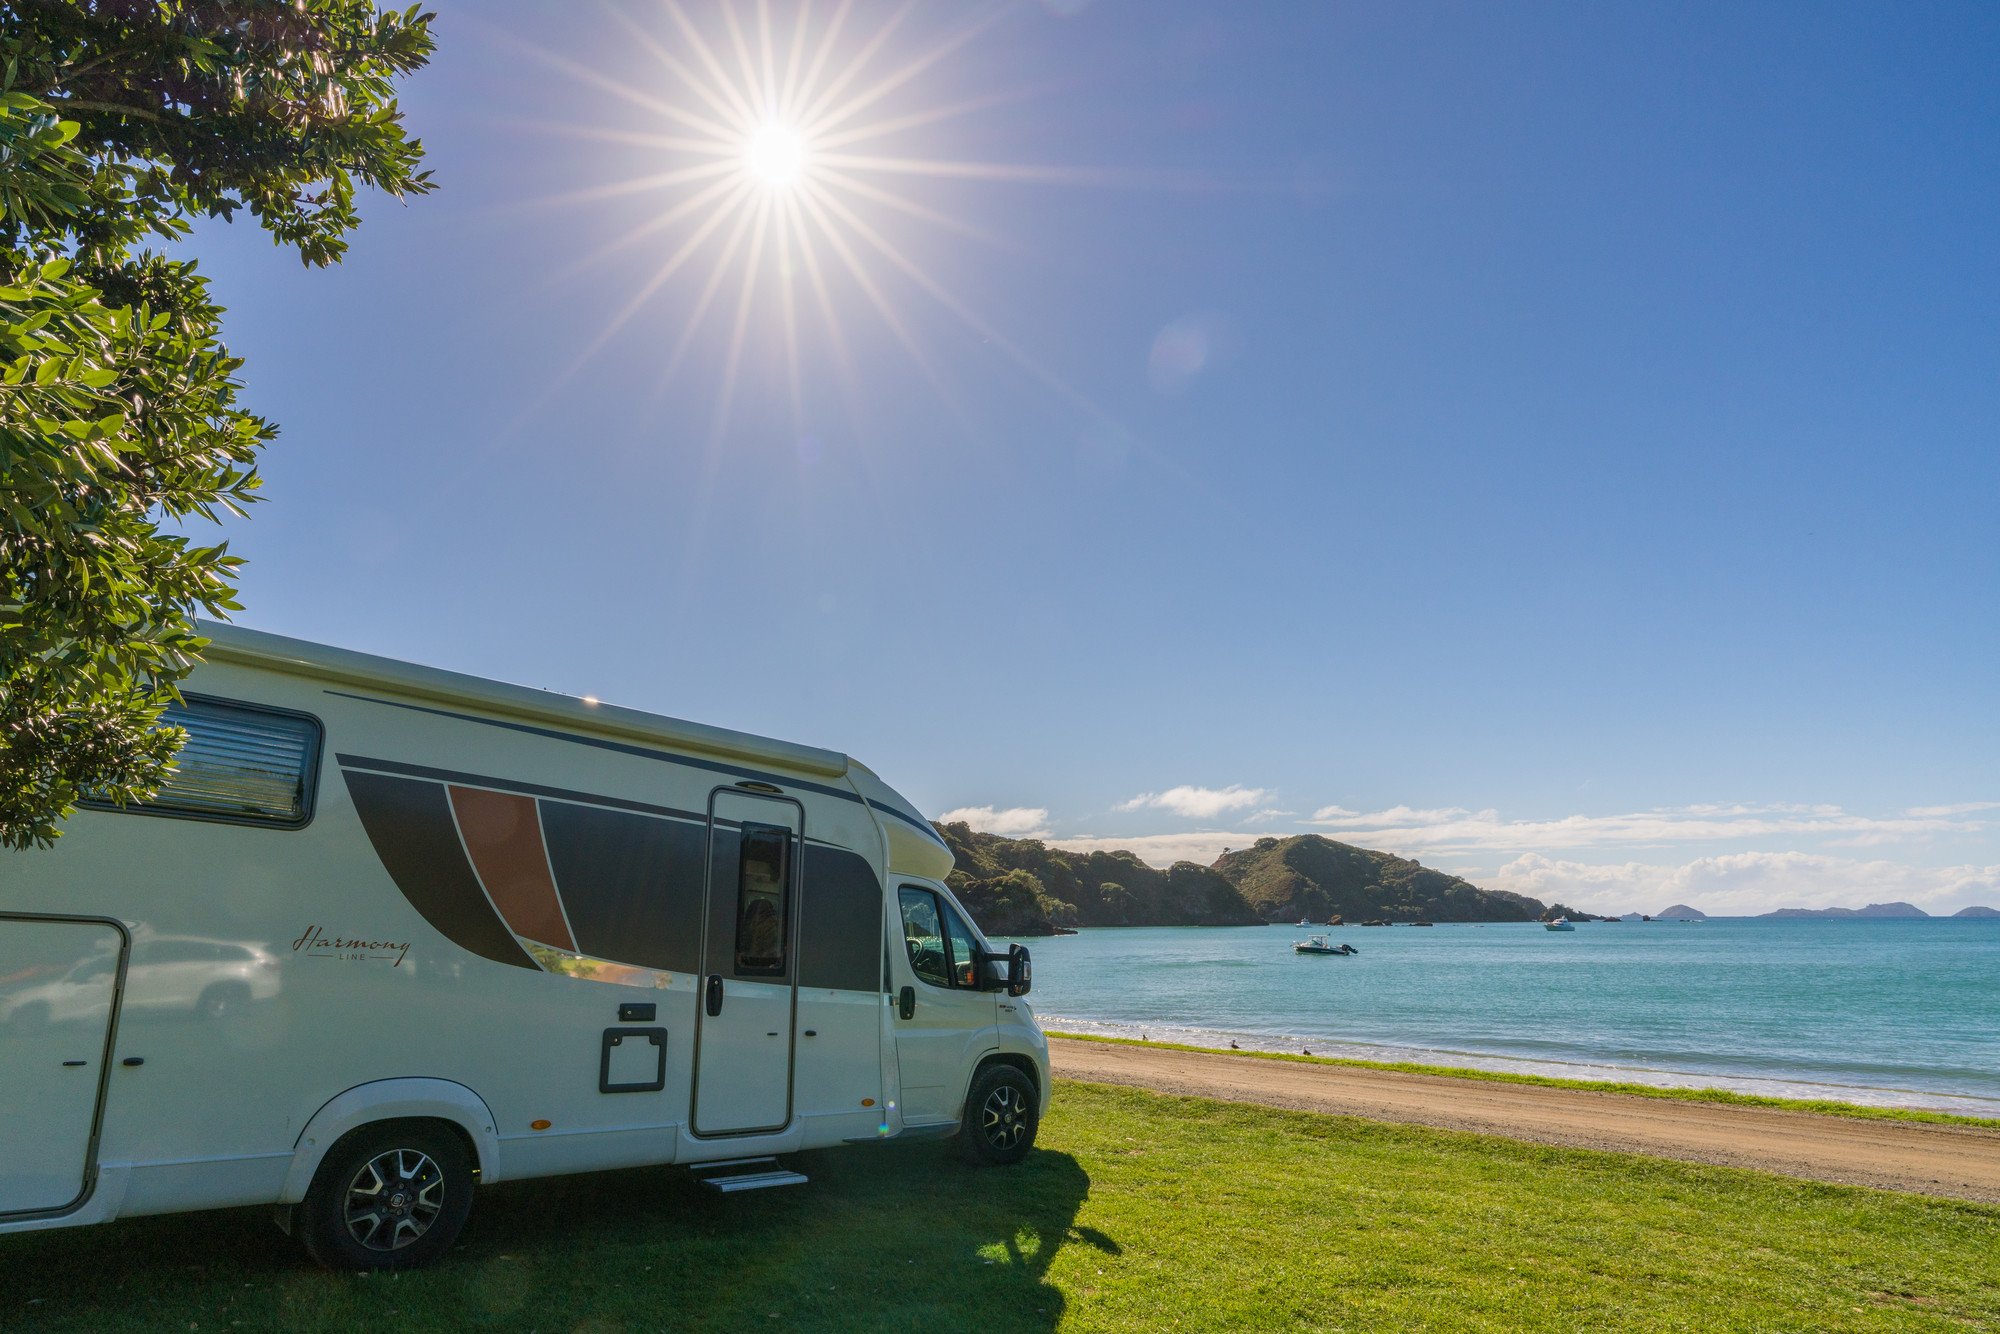 Motorhome on a sunny day by a North Island beach